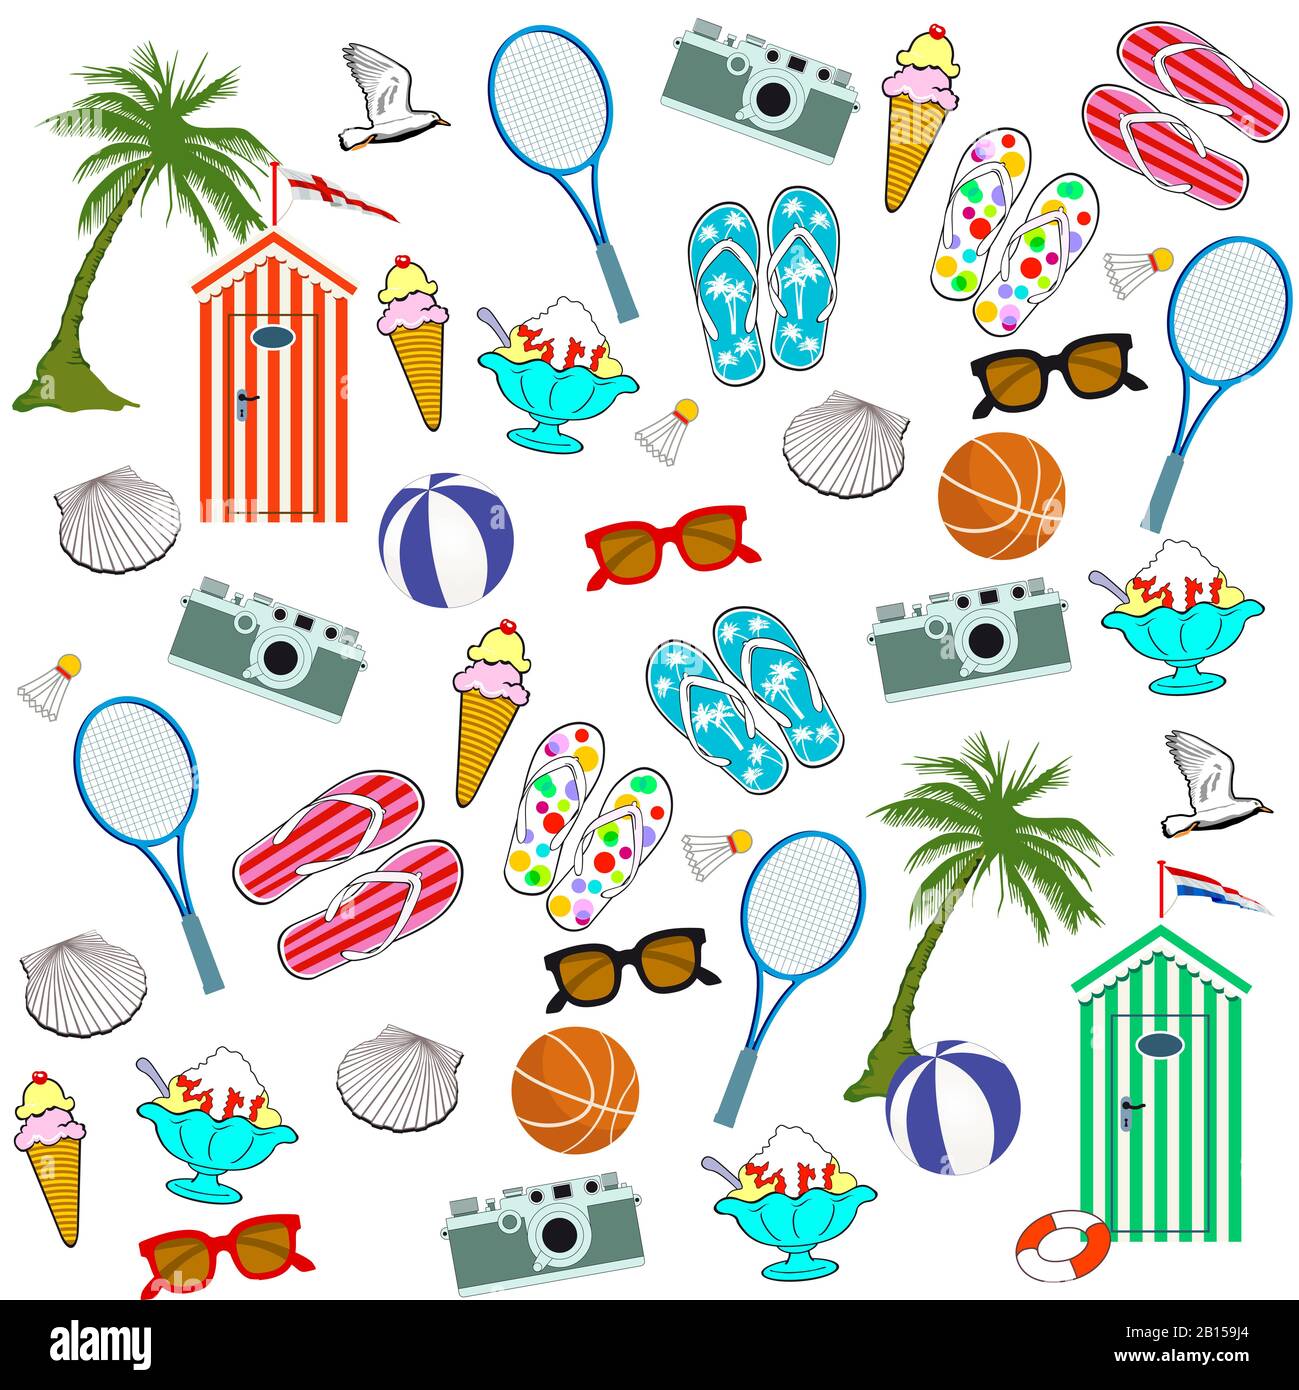 Vacation and travel, relaxation and leisure icon Stock Photo